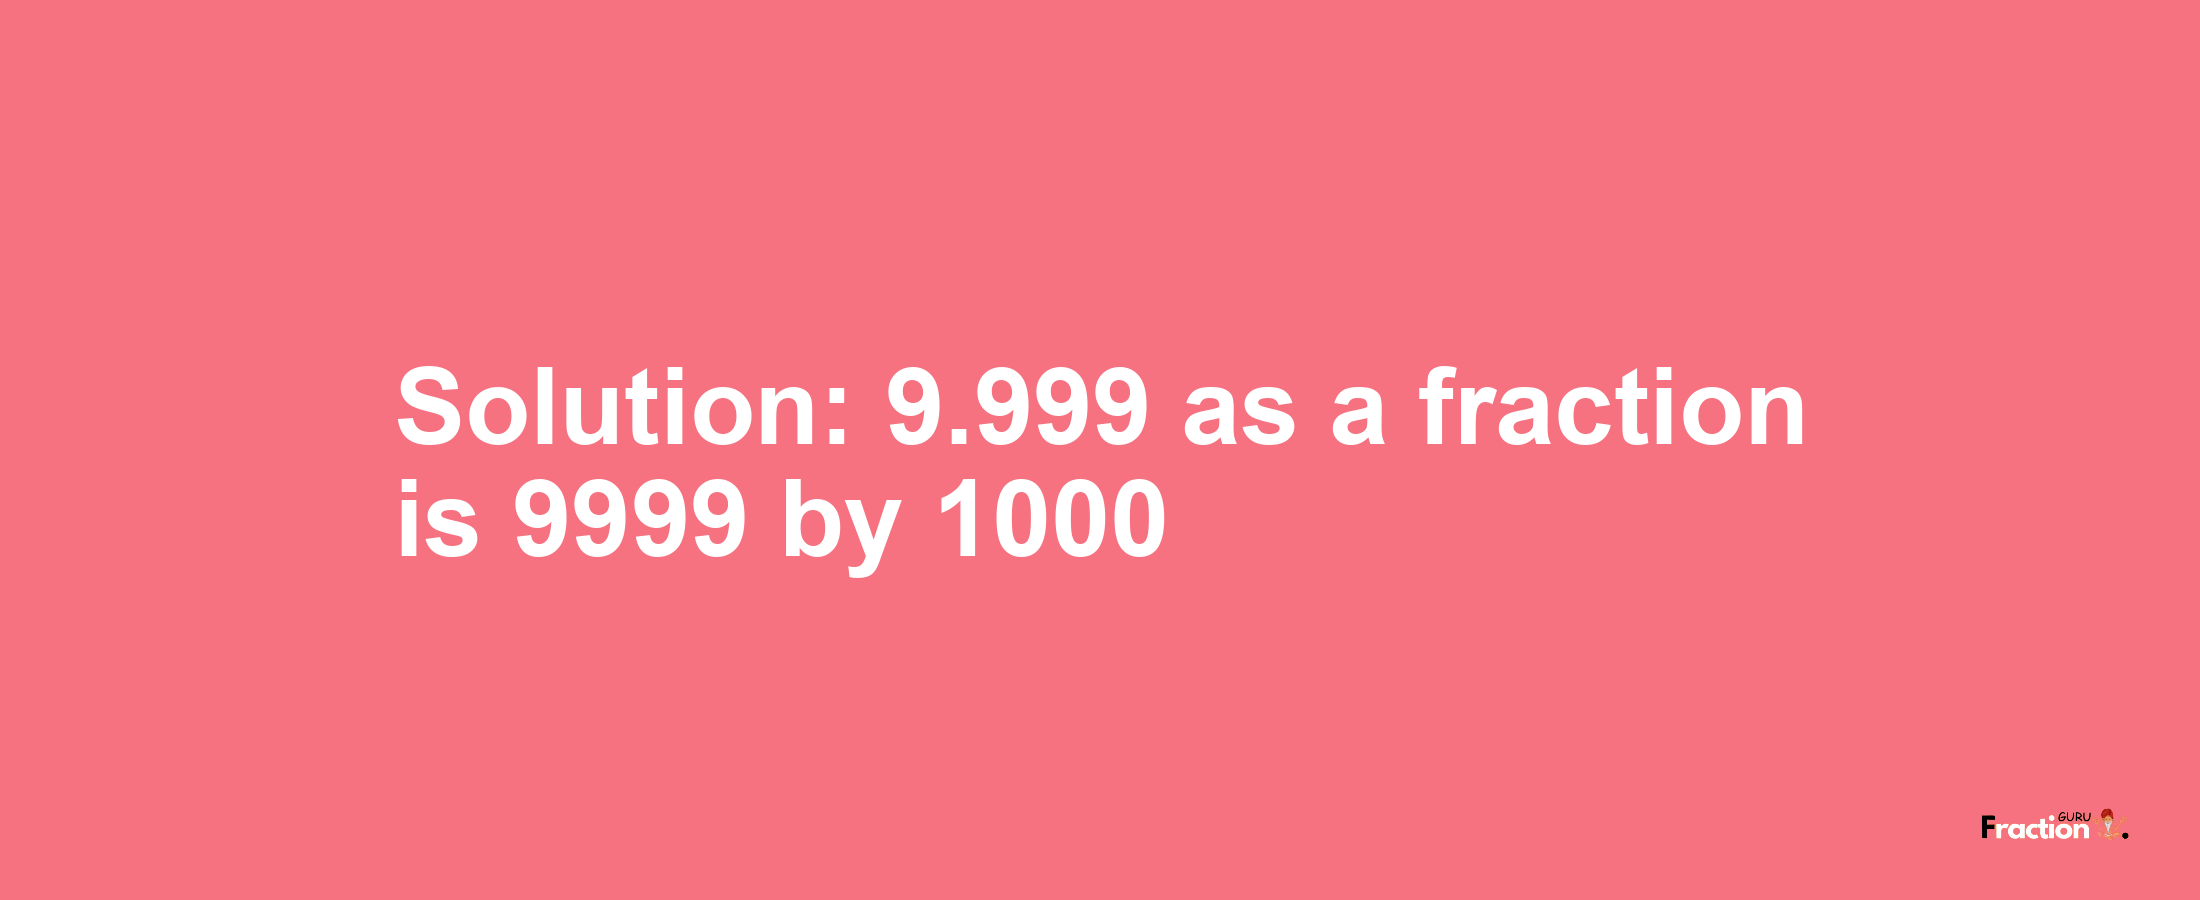 Solution:9.999 as a fraction is 9999/1000